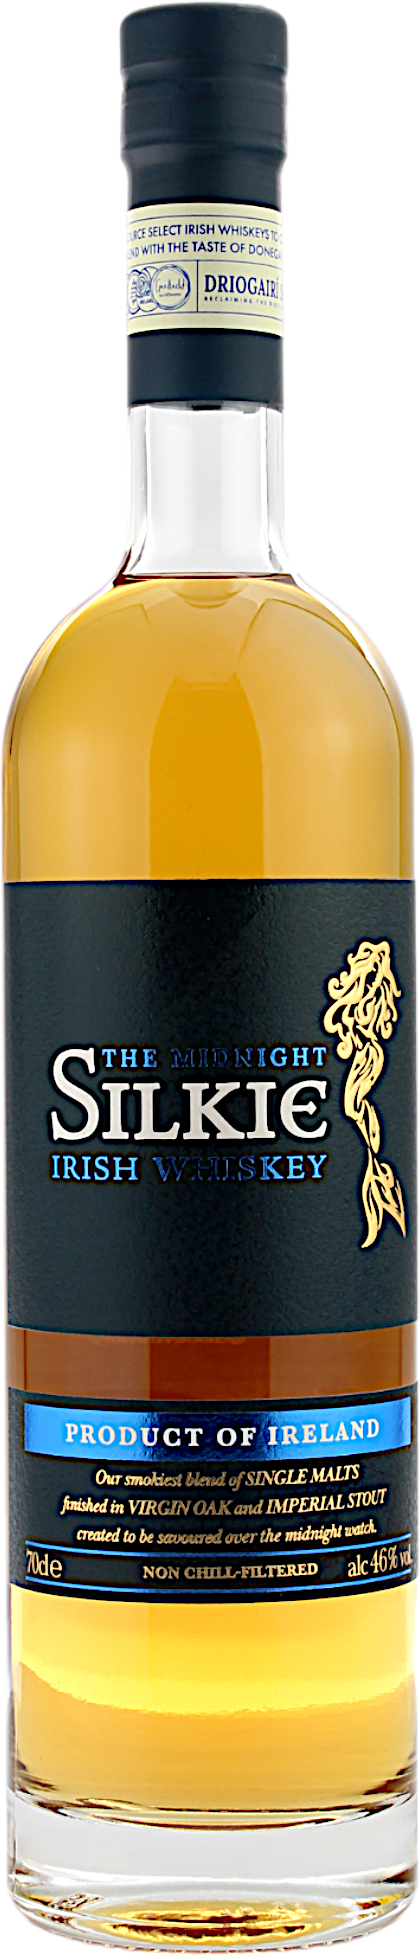 Silkie The Midnight Blended Irish Whiskey 46.0% 0,7l